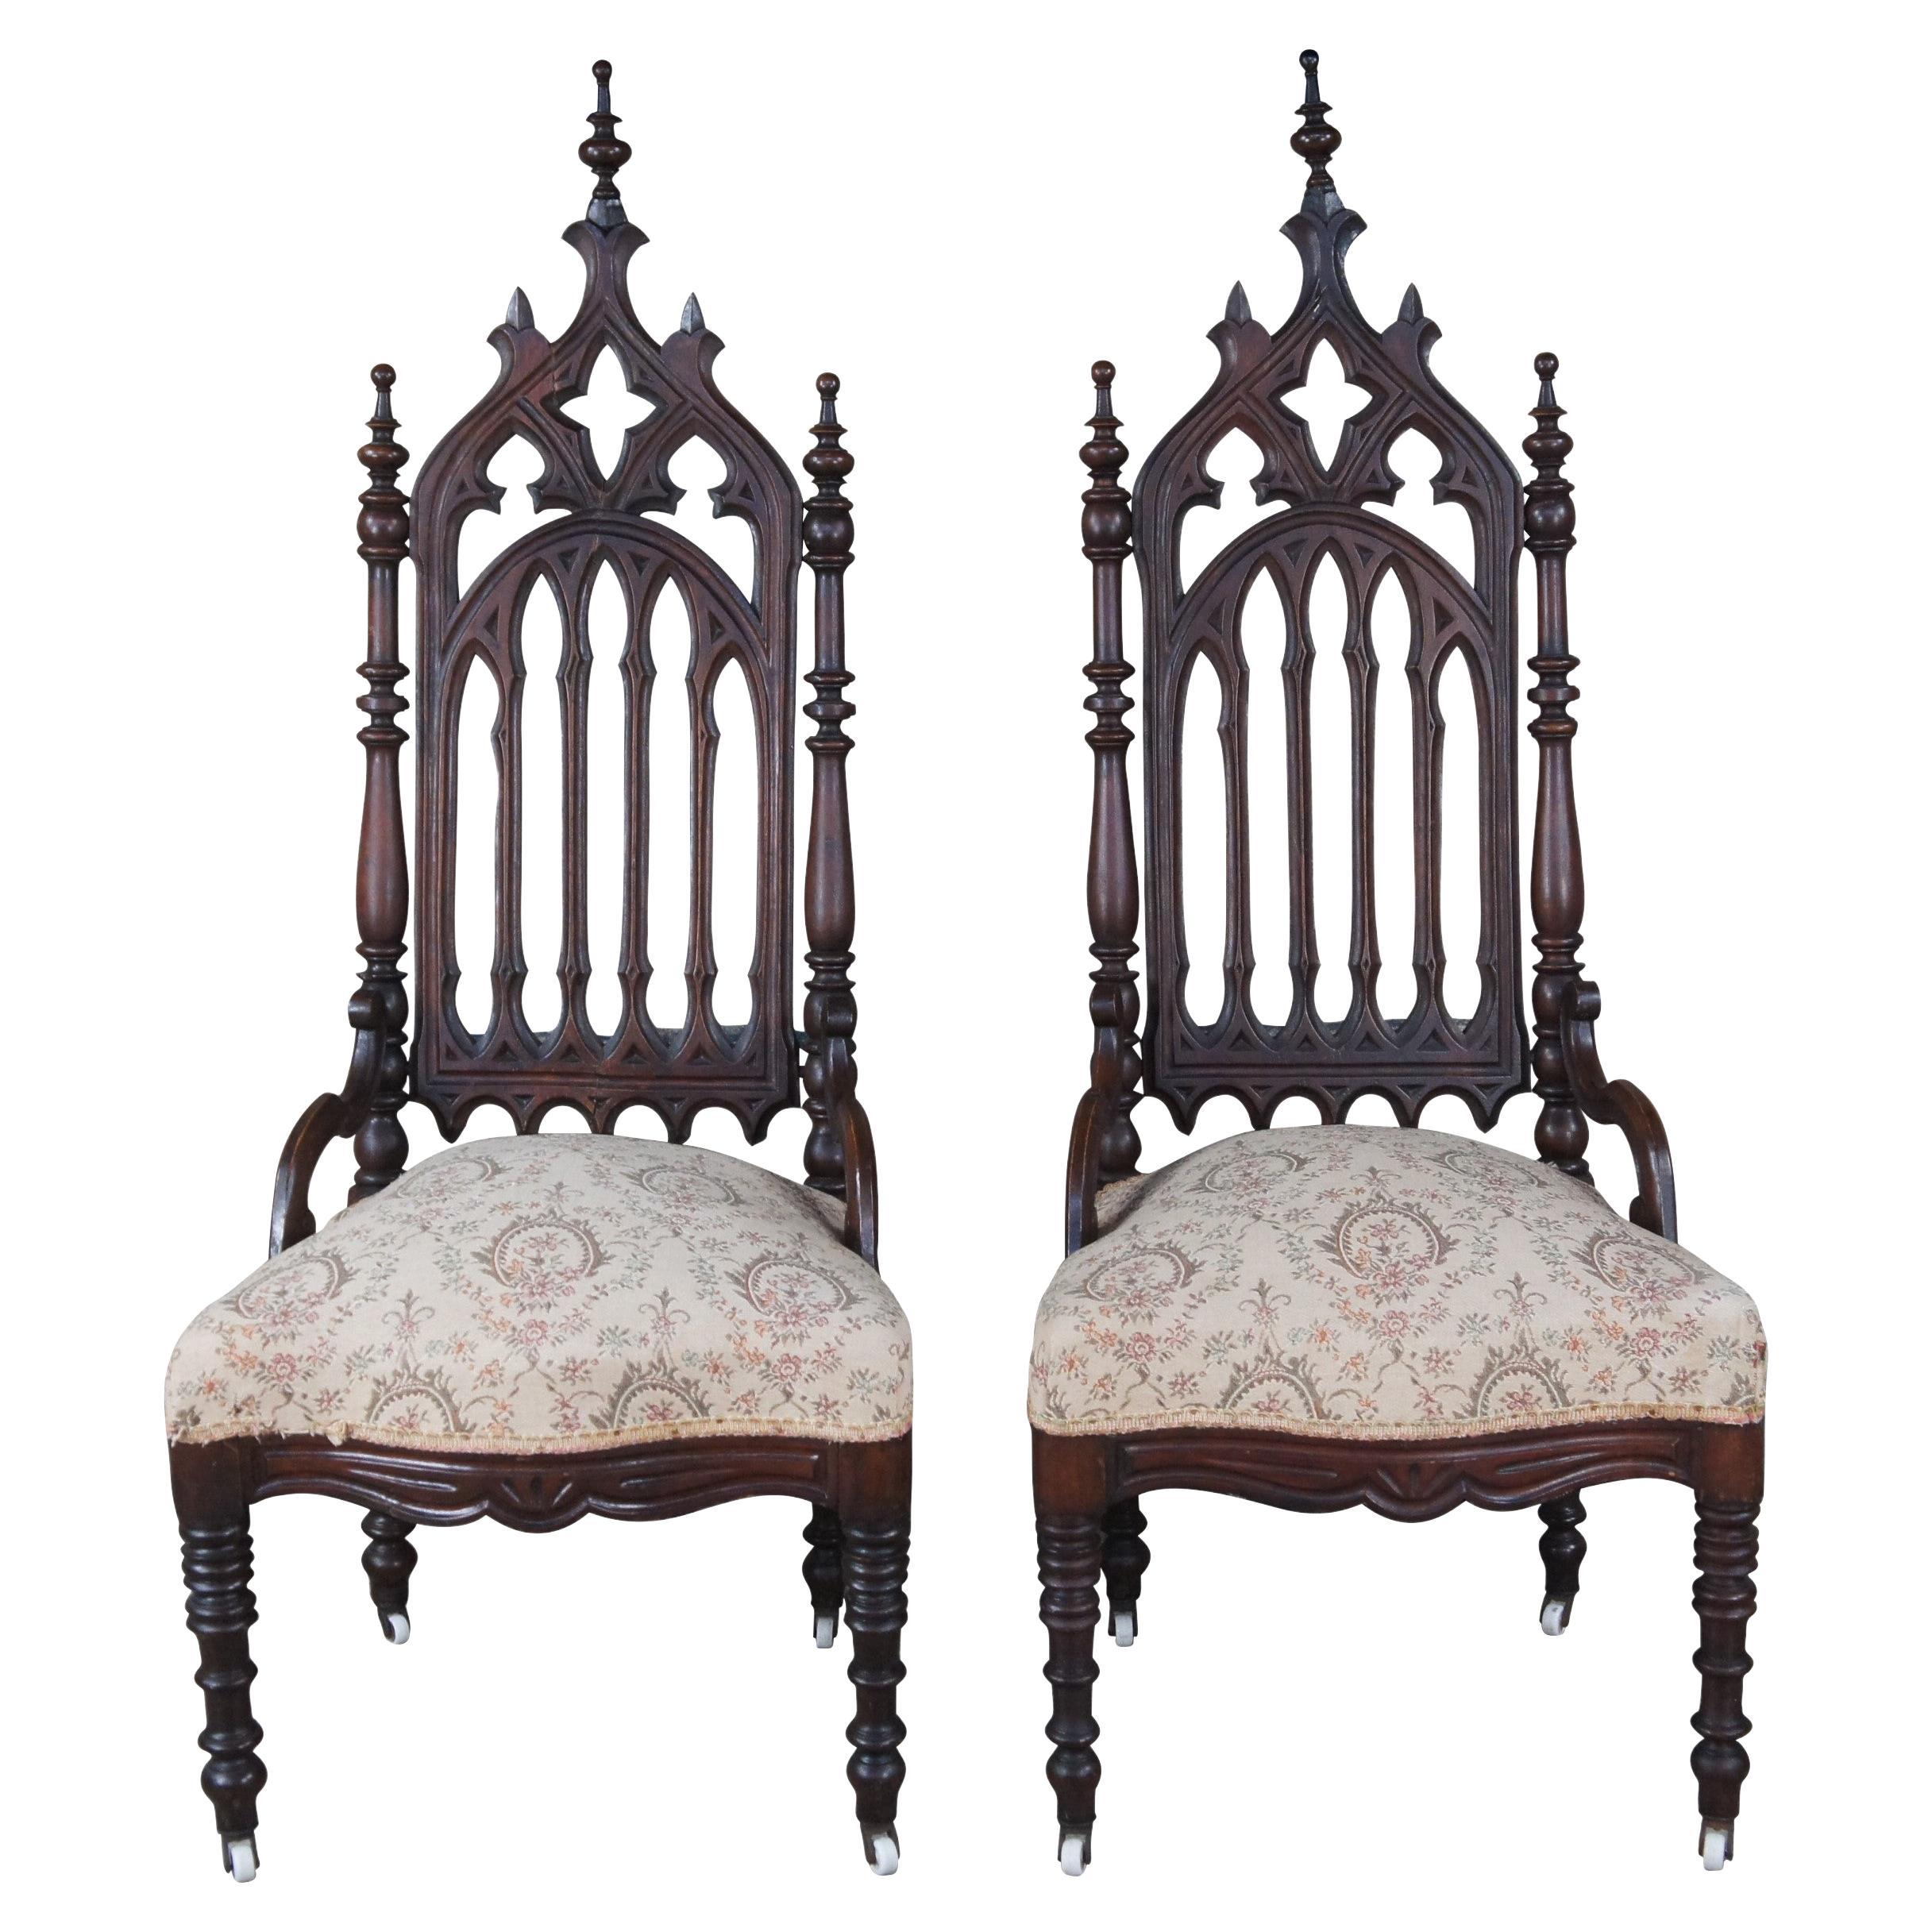 2 Antique Renaissance Gothic Revival Carved Mahogany Throne Dining Chairs For Sale